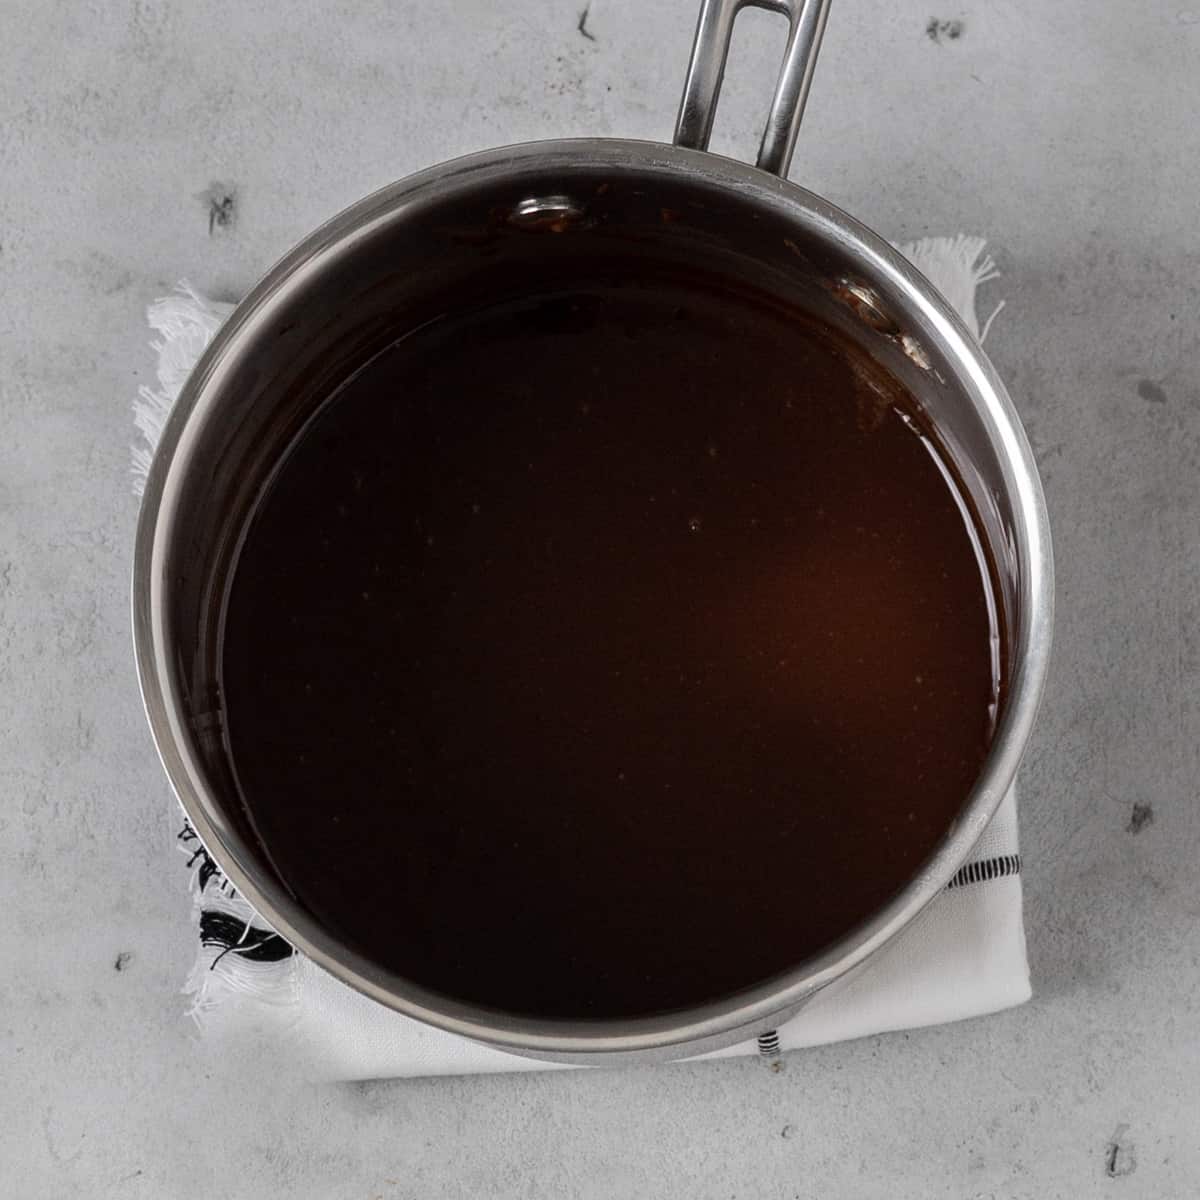 the butter and chocolate melted together in a small stainless steel saucepan on a grey background